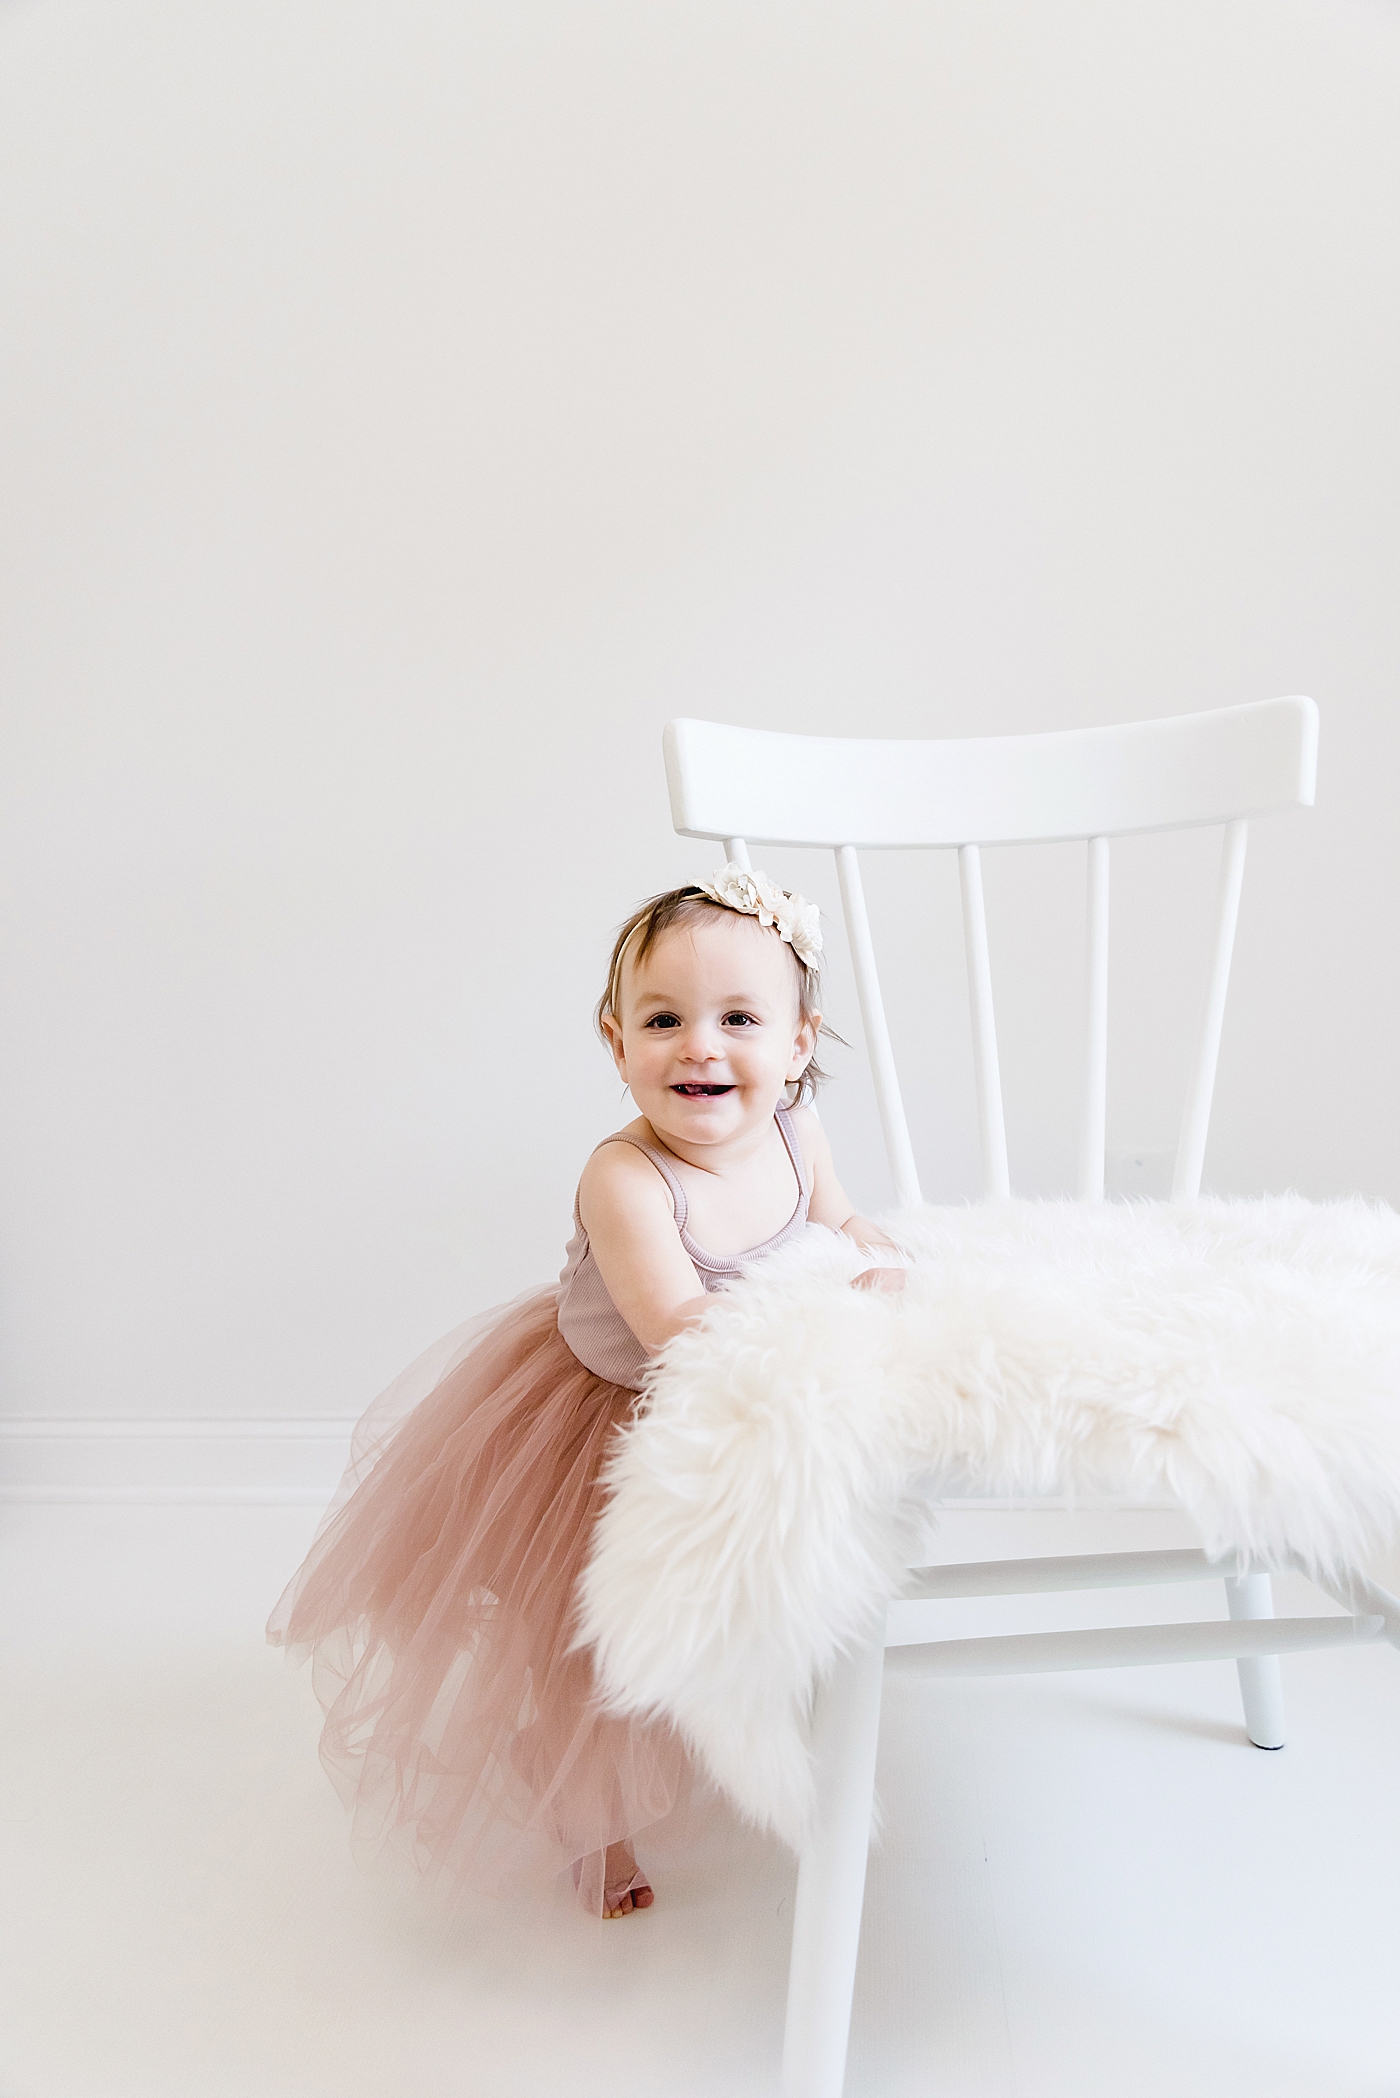 Baby girl in pink smiling at the camera standing near white chair | Photo by Anna Wisjo Photography